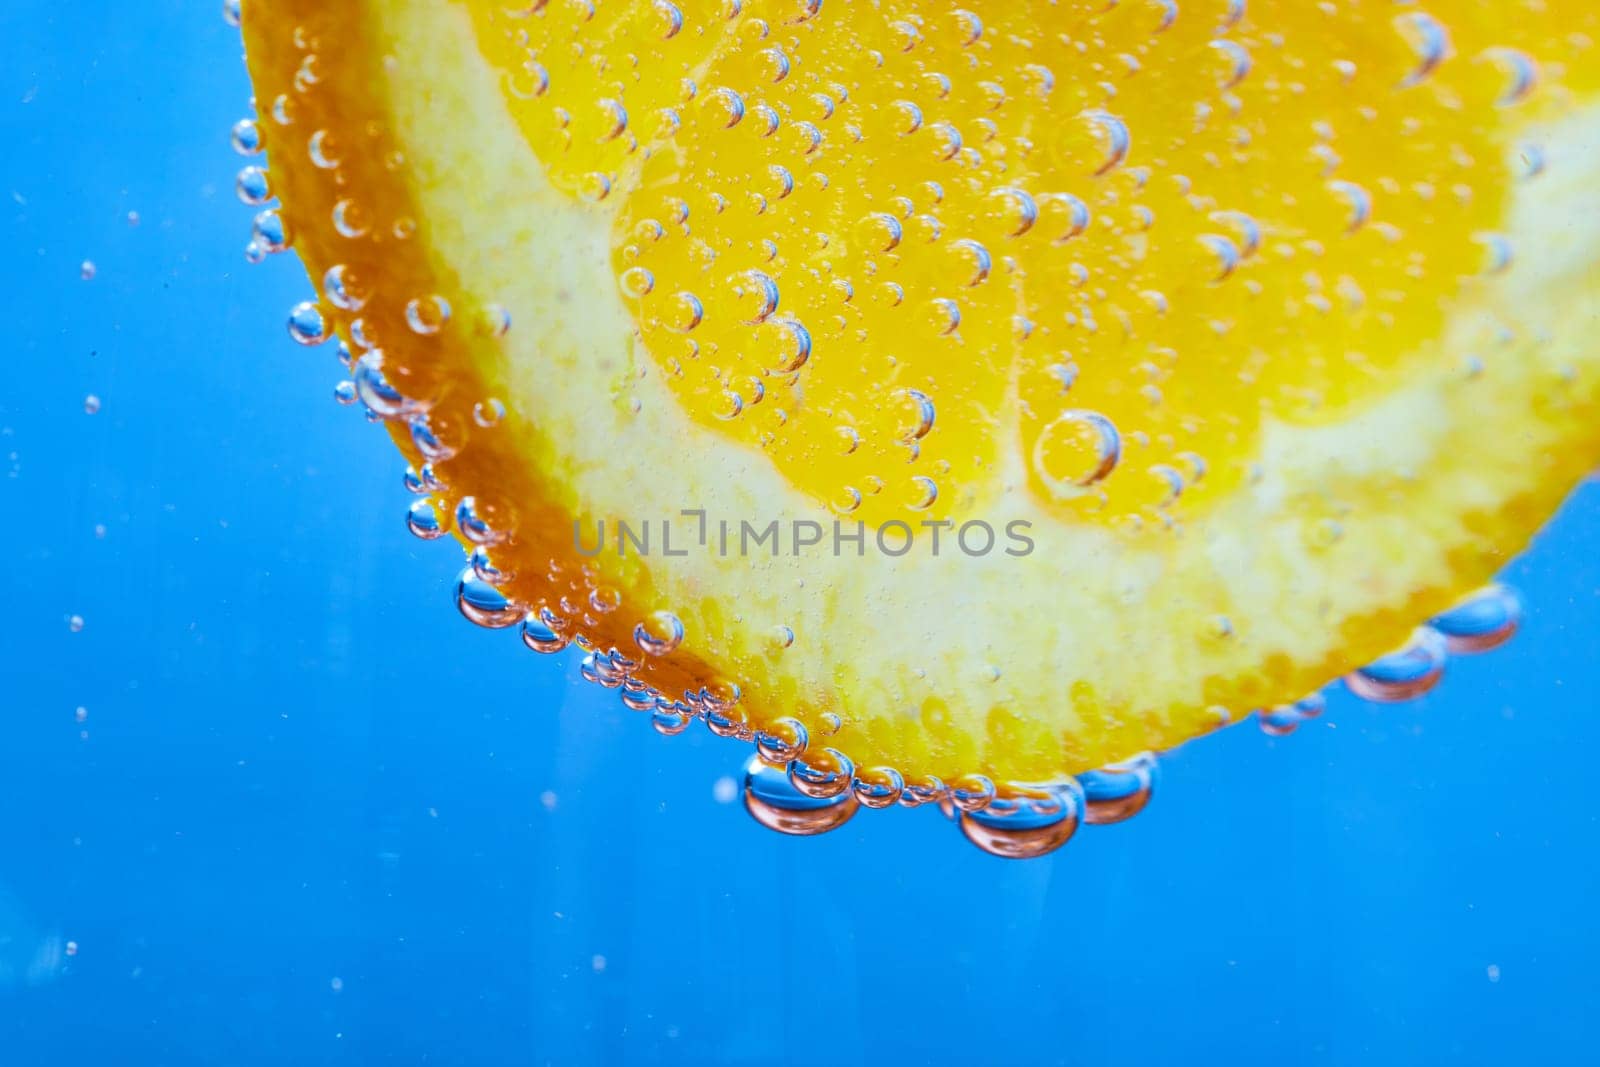 Image of Edge of orange slice covered in silvery bubbles with blue background